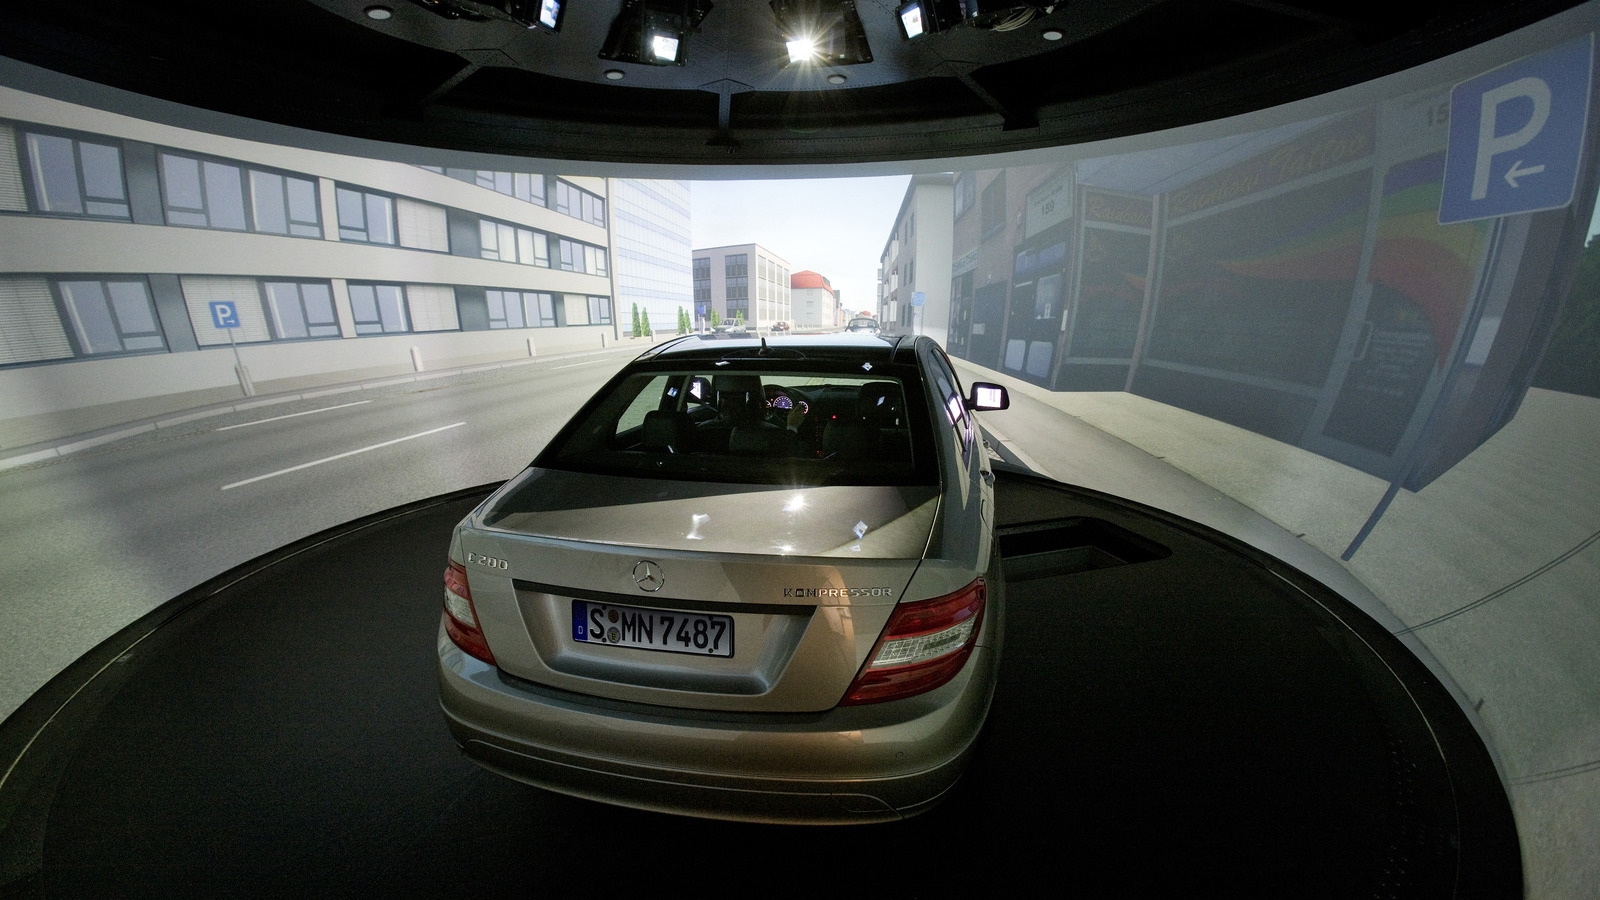 New Mercedes-Benz research facility and driving simulator